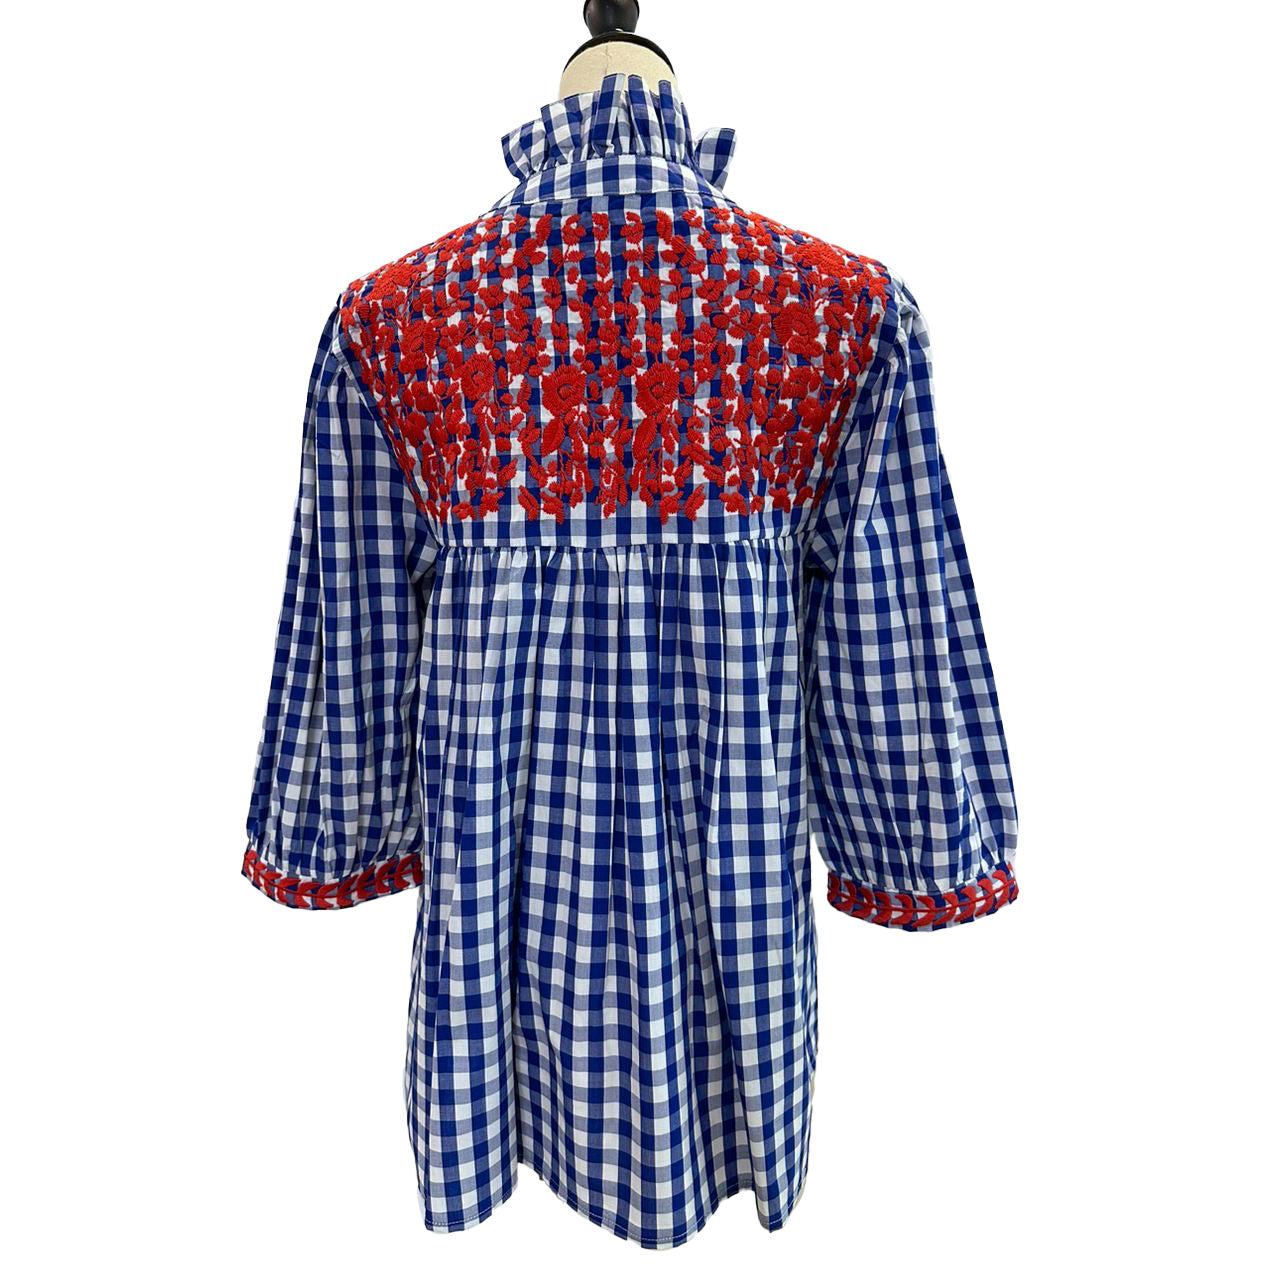 PRE-ORDER: Fourth of July Buffalo Check Tailgater Blouse (shipping first week of June)